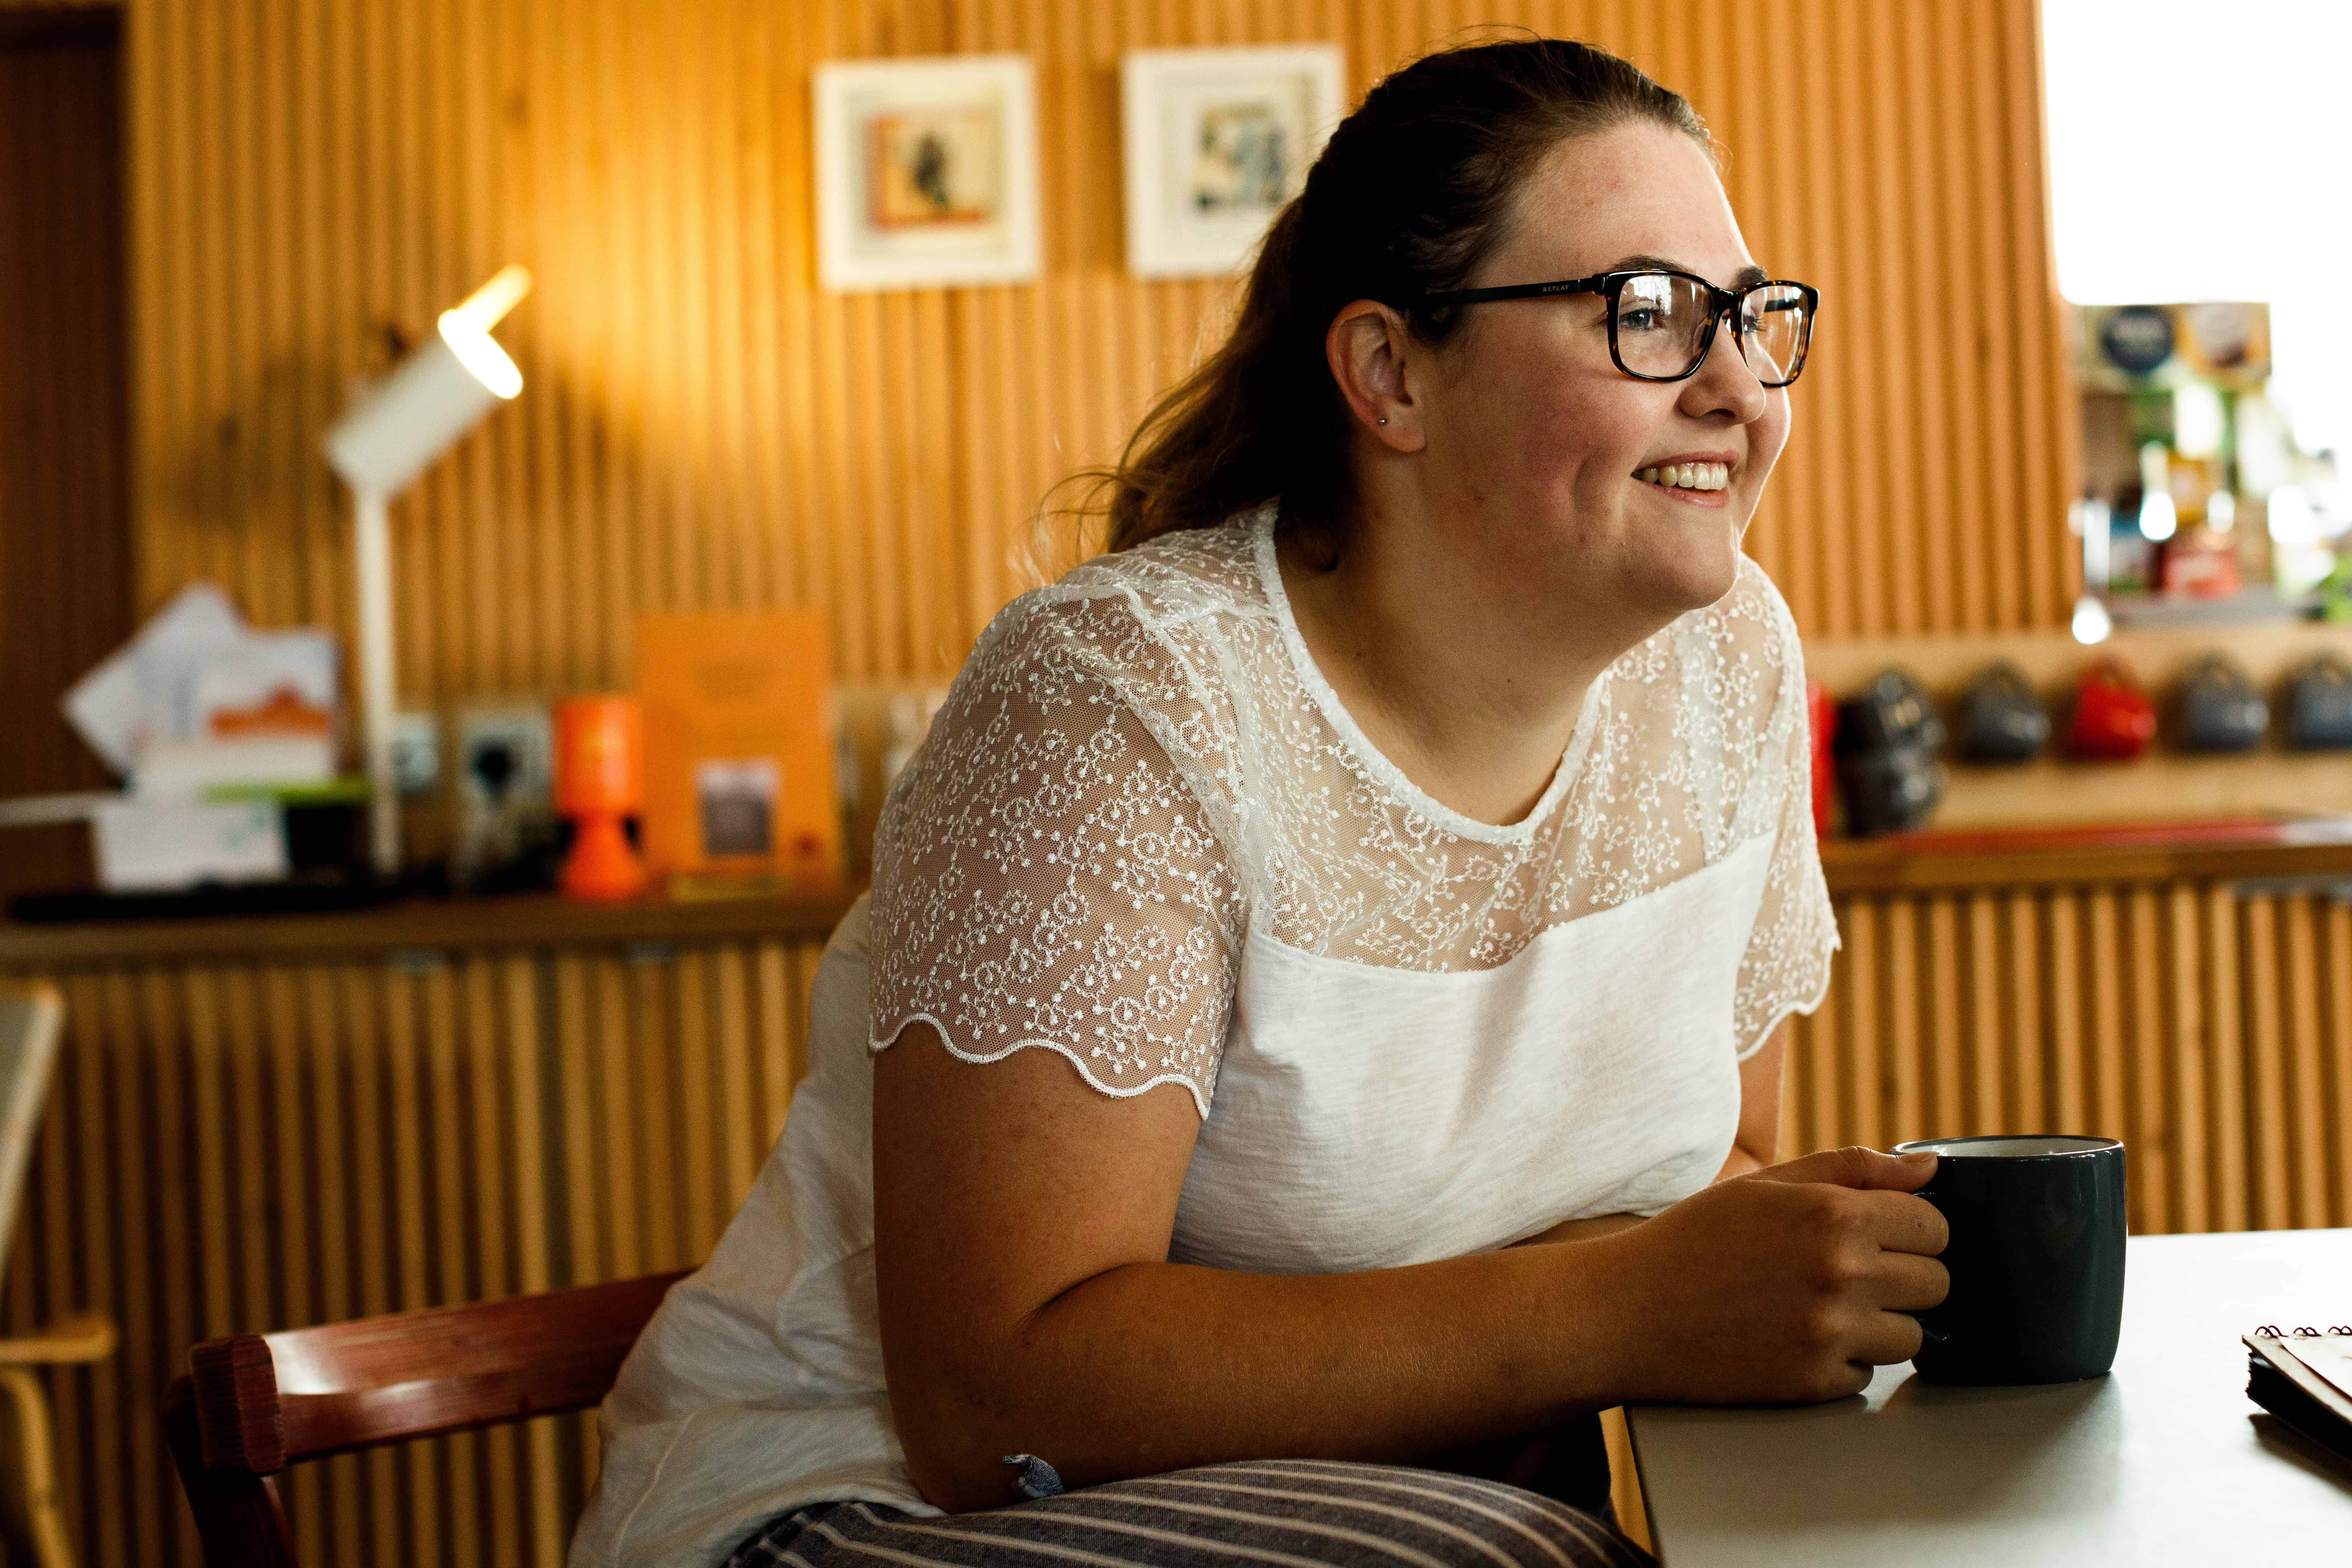 Picture of a woman sat at a table. The woman is leaning on the table and holding a mug. She is wearing a white top and her brown her is in a ponytail. The lady is wearing glasses and smiling.